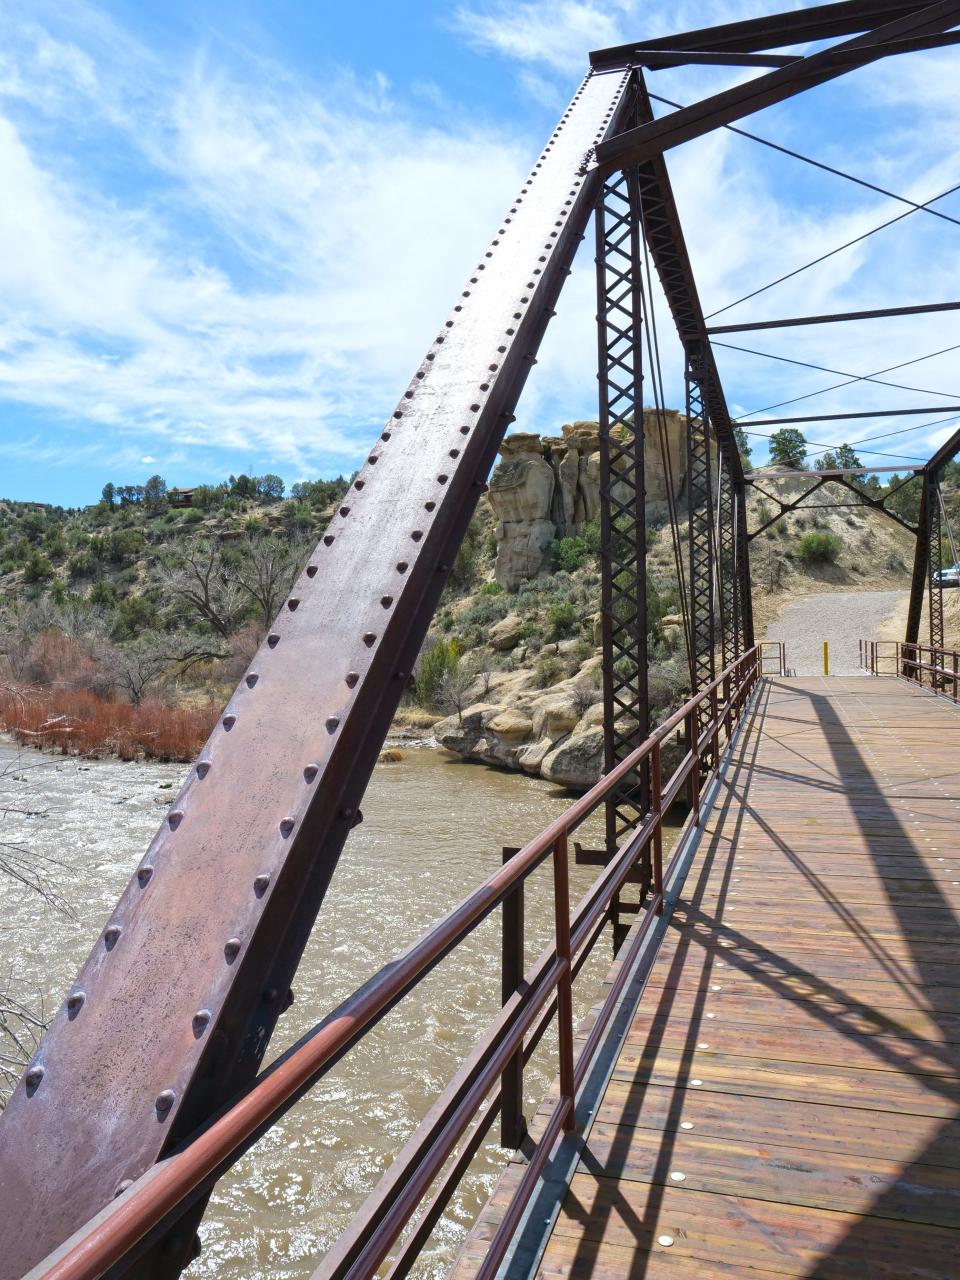 A ribbon-cutting ceremony for the refurbished pedestrian bridge over the Animas River in Cedar Hill will be held by San Juan County officials at 2 p.m. Tuesday, April 30.